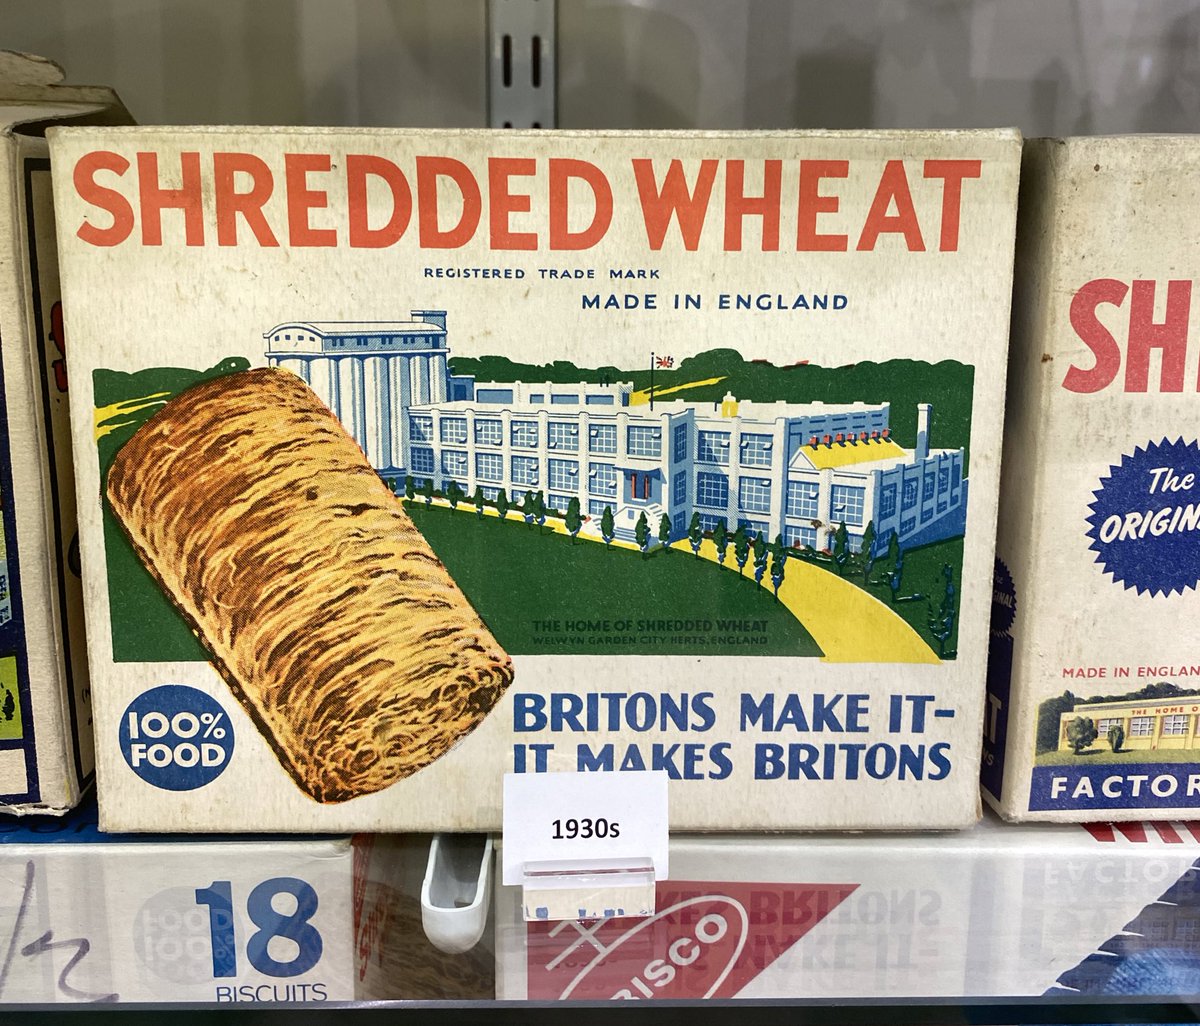 I learn – from a trip to the fab @MuseumofBrands – that Shredded Wheat used to be called Welgar Shredded Wheat. Named after Welwyn Garden City, where it was made.